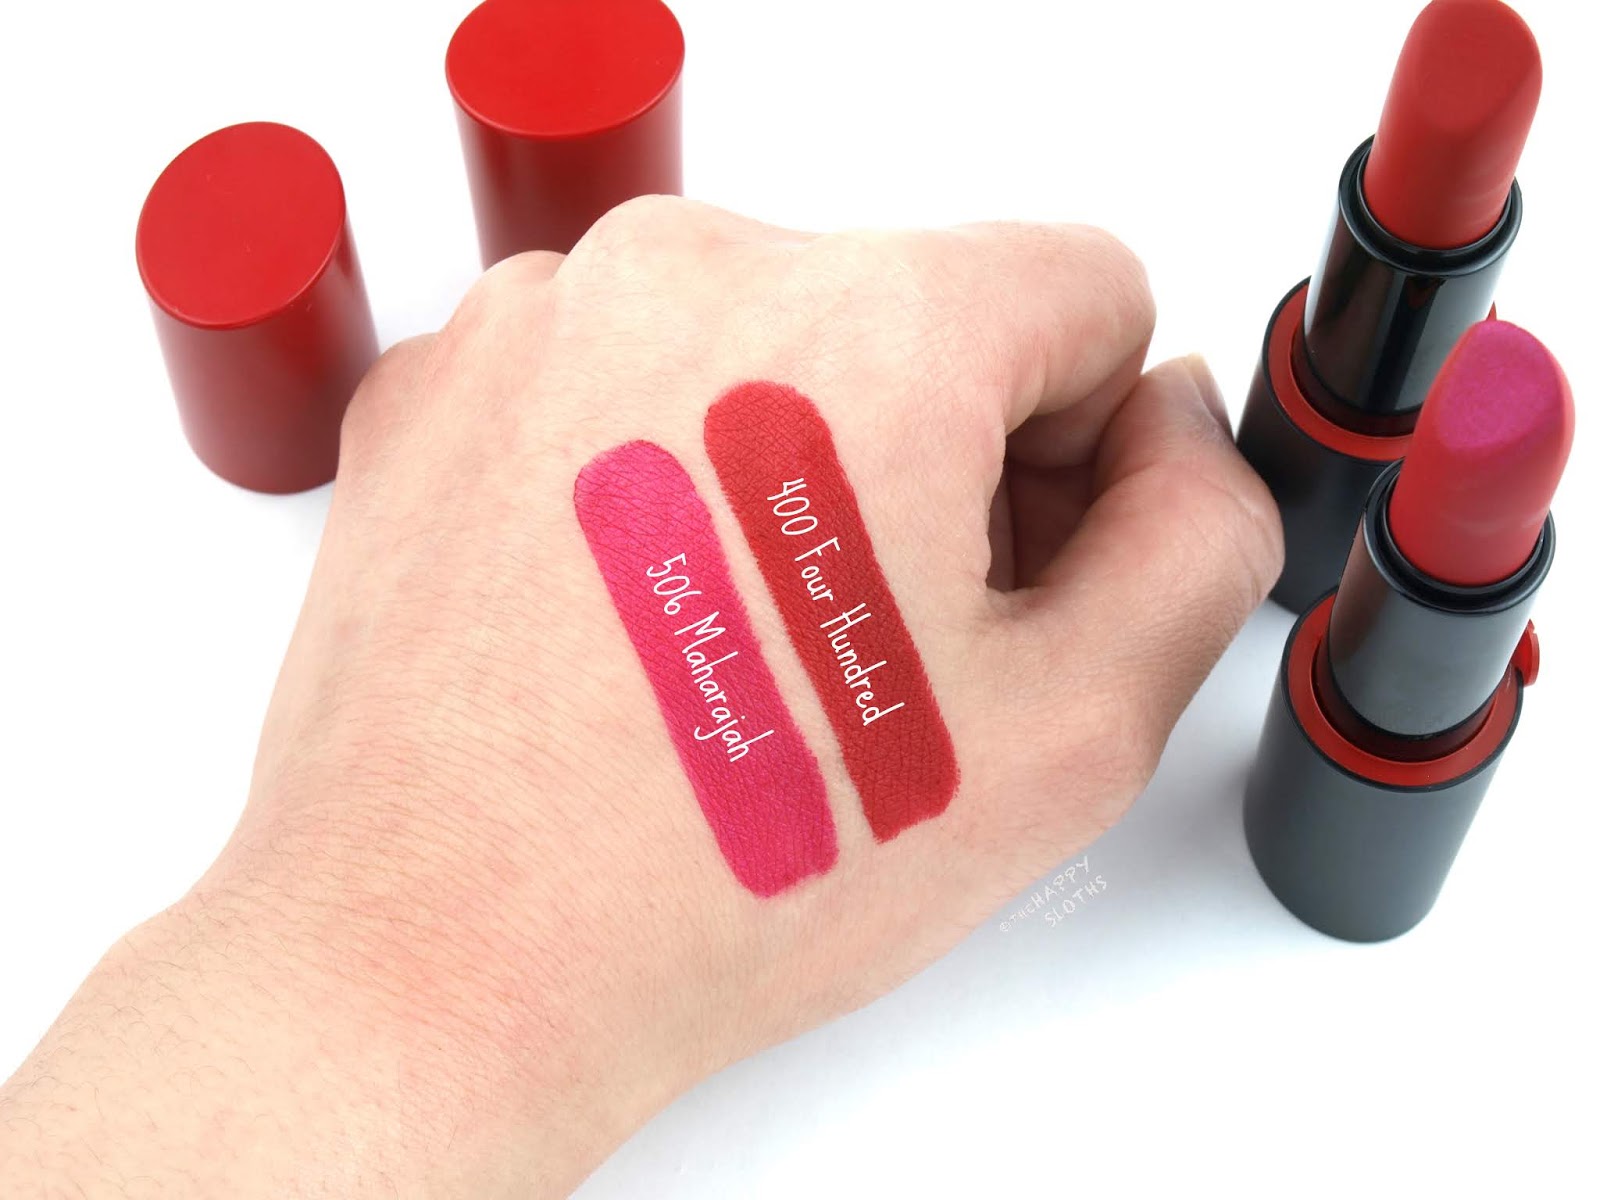 Giorgio Armani Beauty | Rouge d'Armani Matte Lipsticks in "400 Four Hundred" & "506 Maharajah": Review and Swatches